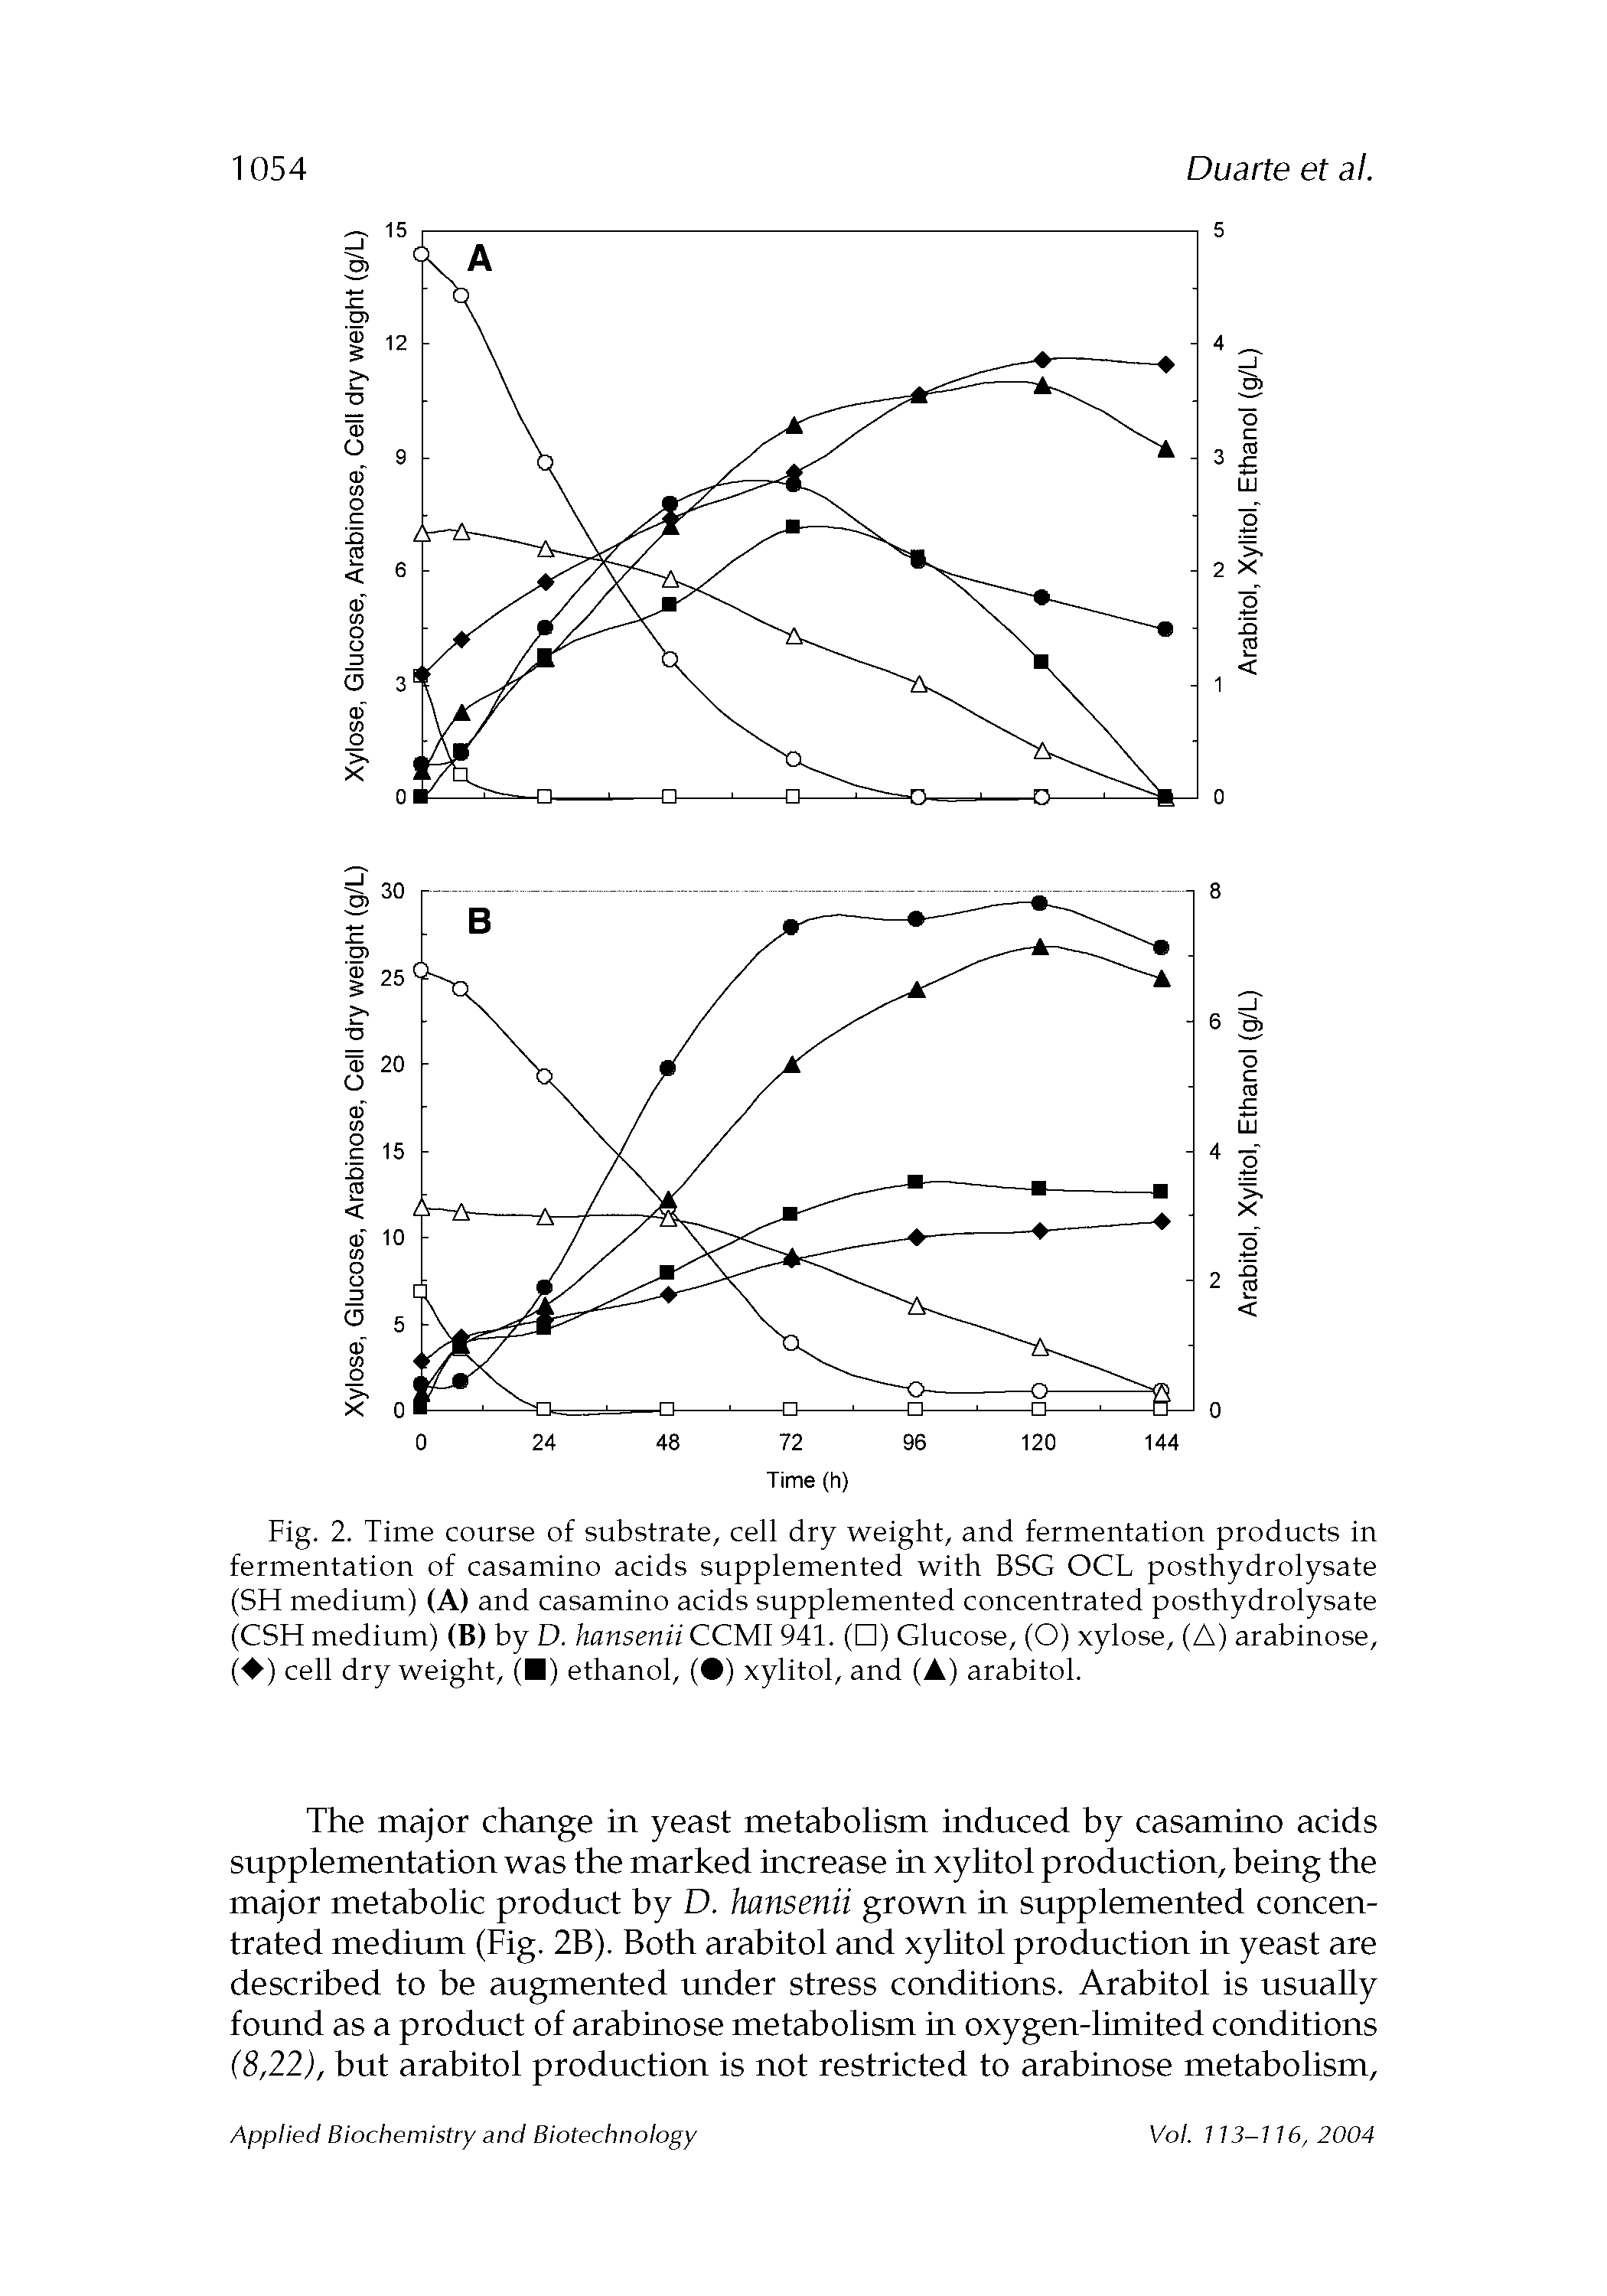 Fig. 2. Time course of substrate, cell dry weight, and fermentation products in fermentation of casamino acids supplemented with BSG OCL posthydrolysate (SH medium) (A) and casamino acids supplemented concentrated posthydrolysate (CSH medium) (B) by D. hansenii CCMI 941. ( ) Glucose, (O) xylose, (A) arabinose, ( ) cell dry weight, ( ) ethanol, ( ) xylitol, and (A) arabitol.